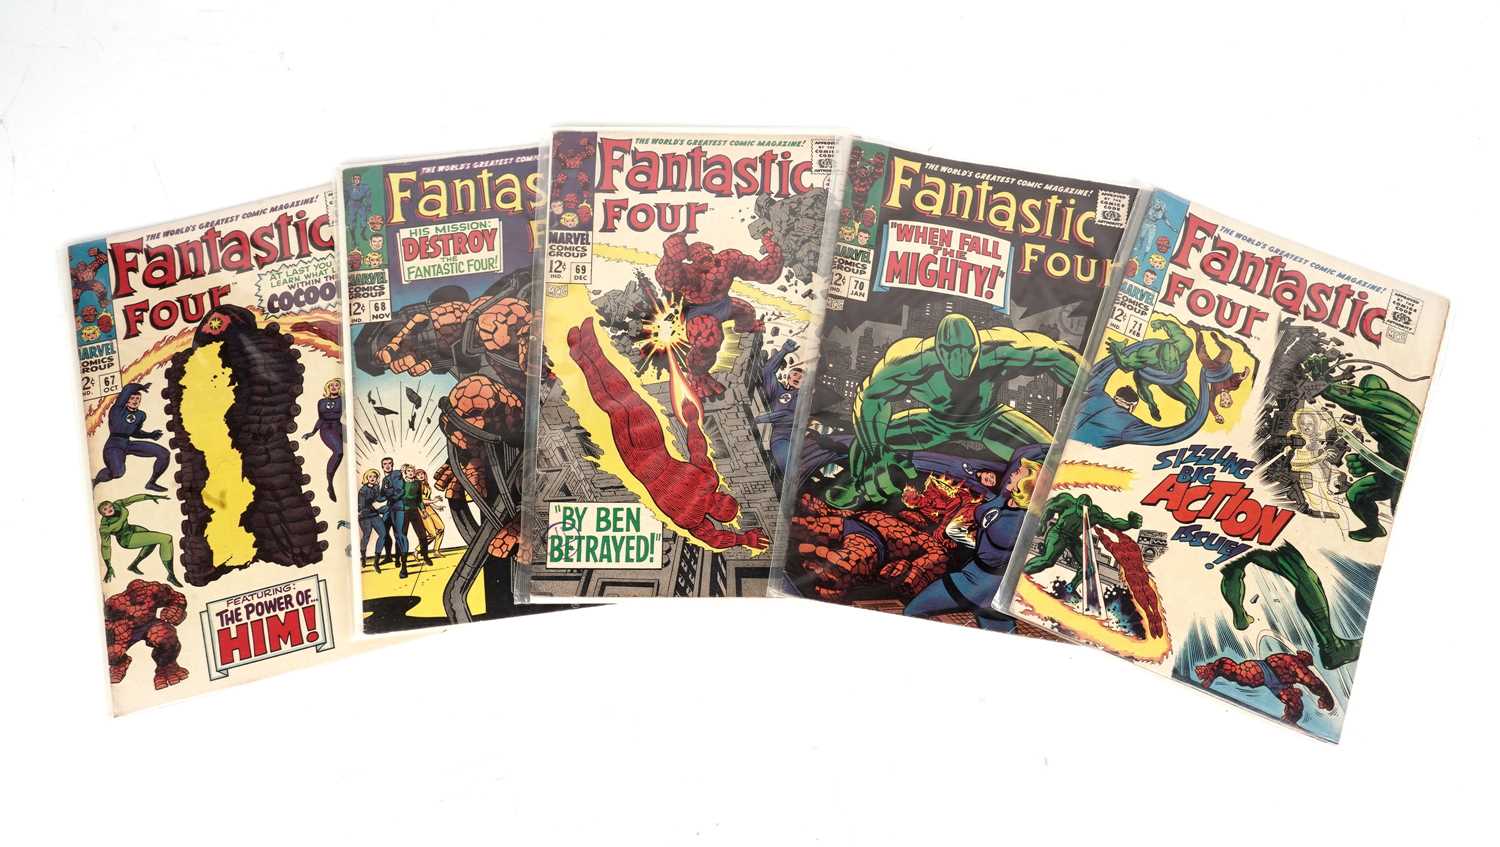 The Fantastic Four No's. 67-71 by Marvel Comics